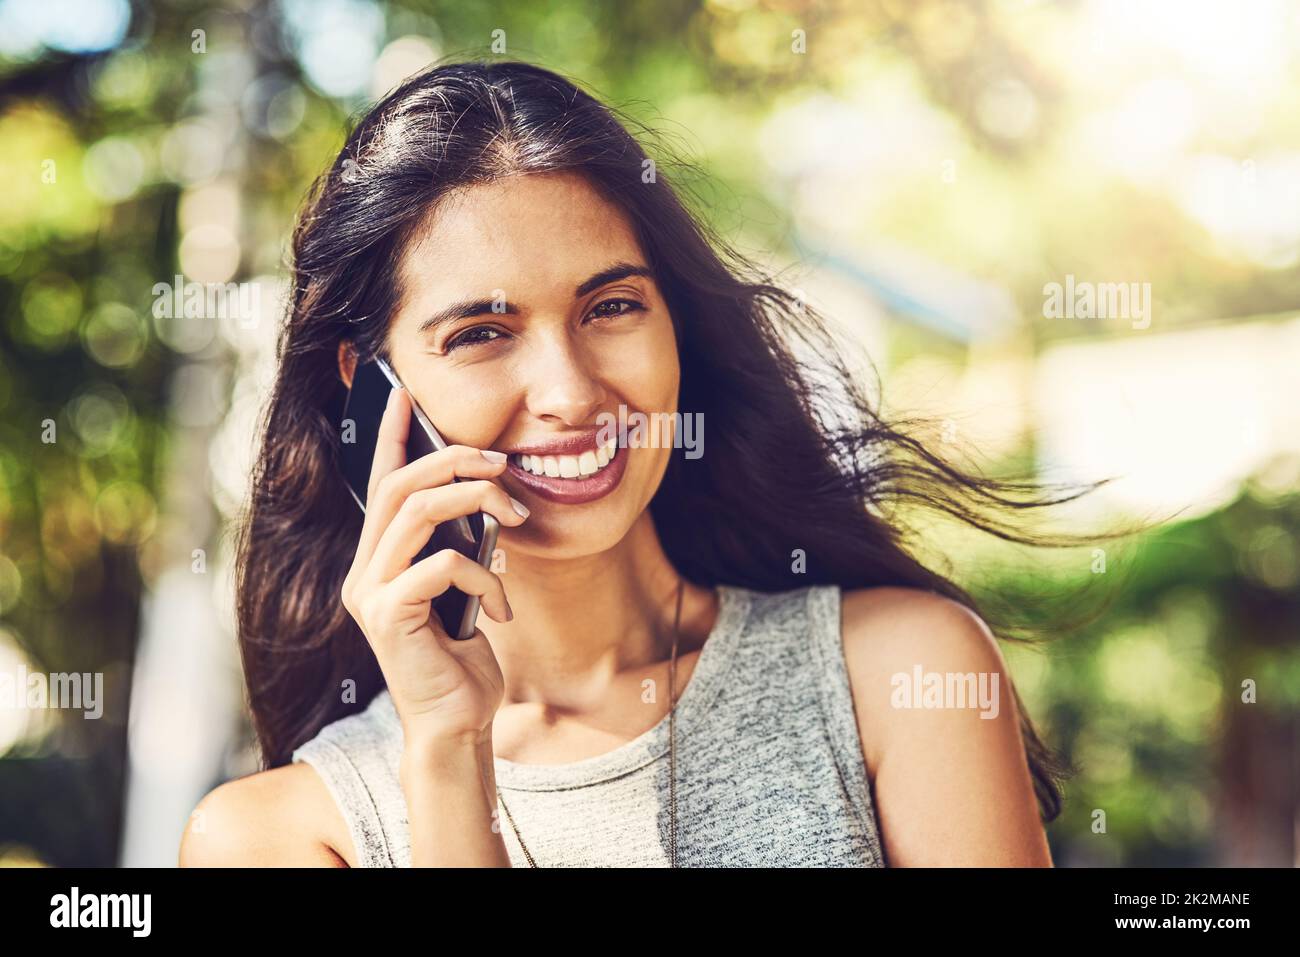 I cant survive without my connections. Portrait of an attractive young woman talking on a cellphone outdoors. Stock Photo